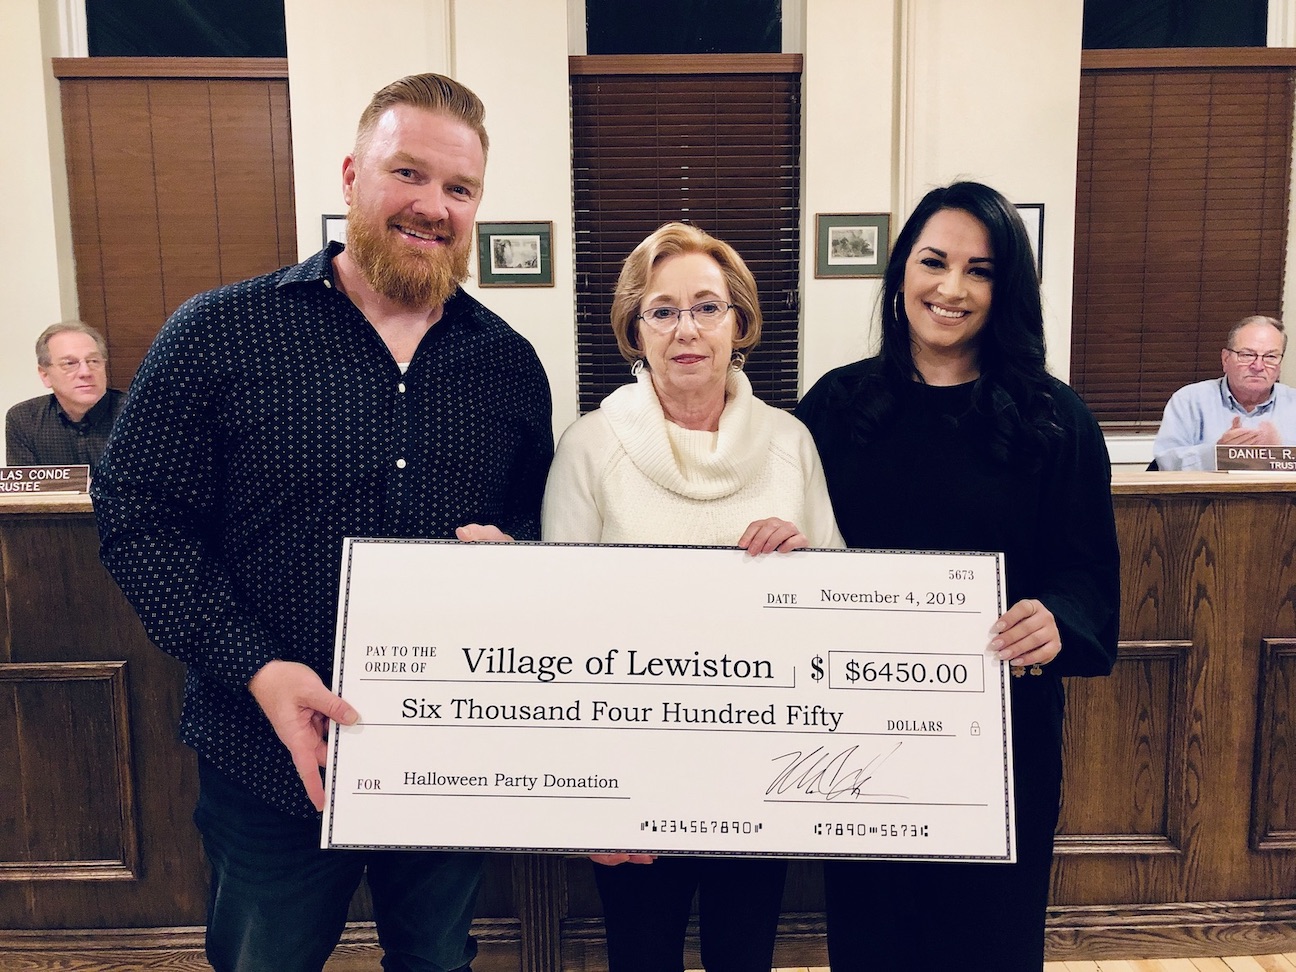 Michael Carroll and his girlfriend, Brittney Page, present a donation to Village of Lewiston Mayor Anne Welch prior to Monday's Village Board work session.